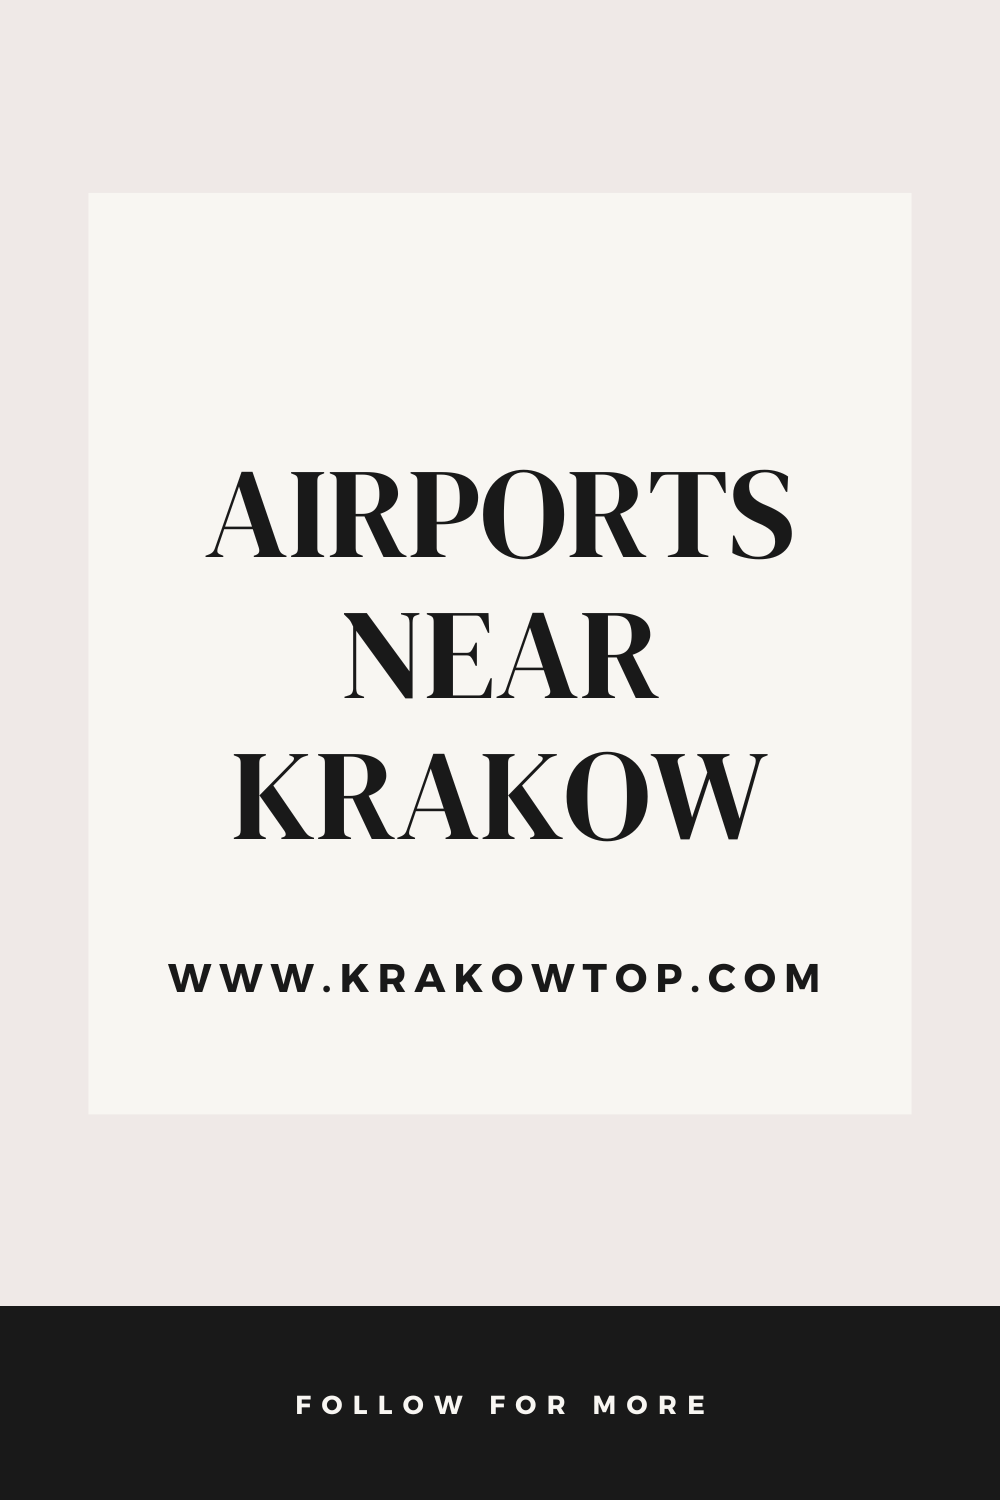 What Airports are Near Krakow